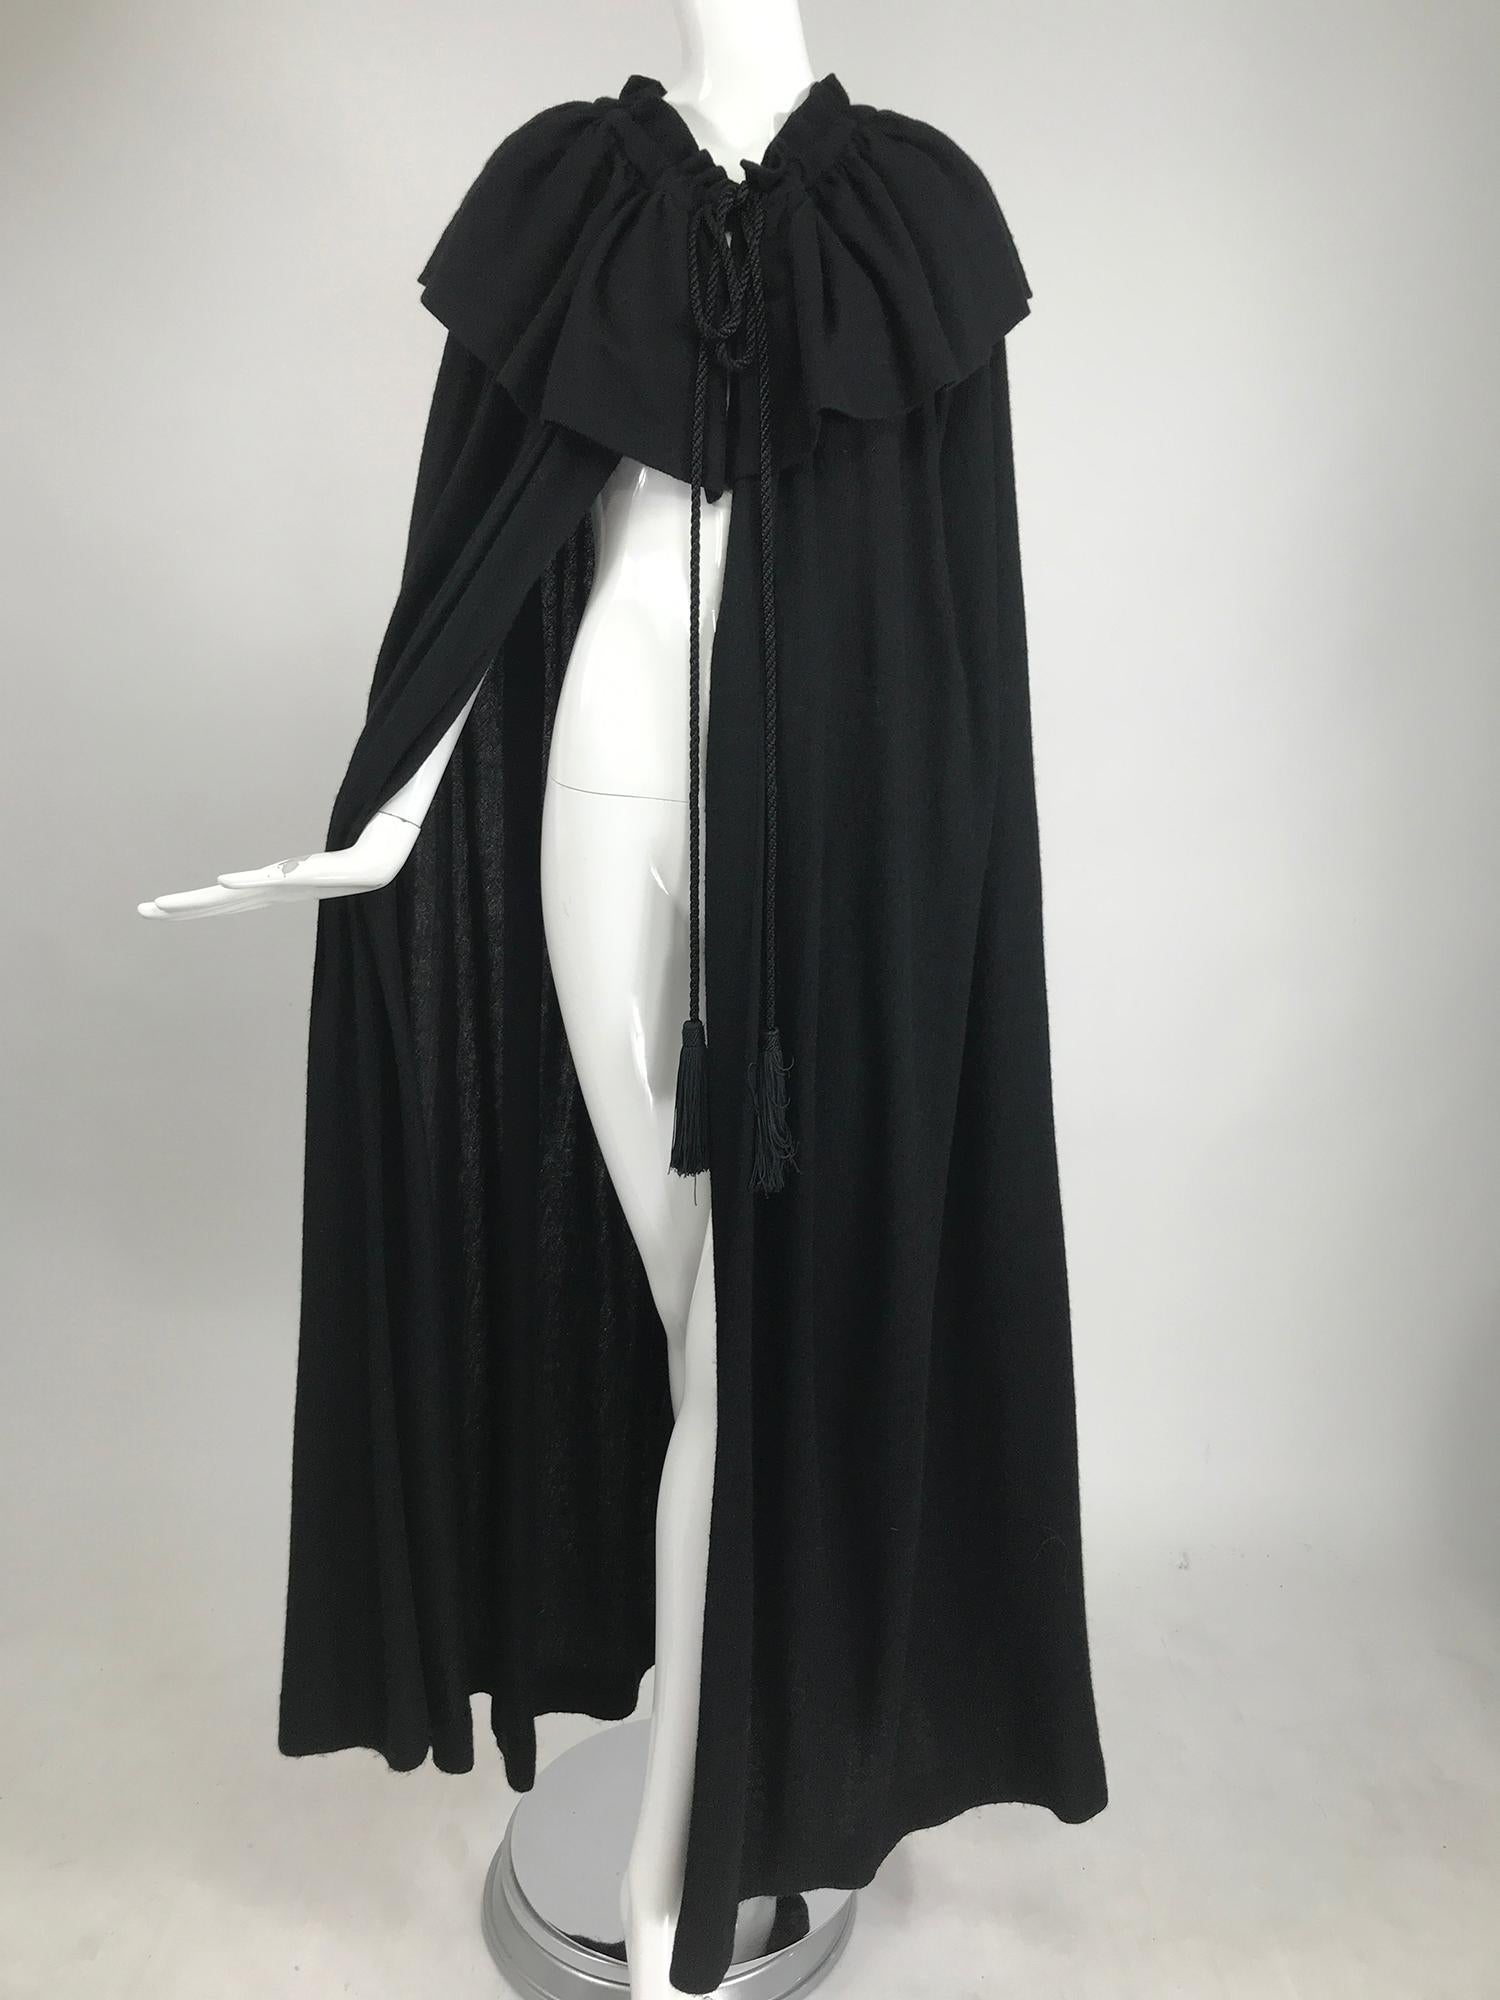 Vintage Yves Saint Laurent, Rive Gauche black wool cape from the 1970s. Lightweight  black wool cape with long silky black tassel end neck ties The ties run through the neck casing and can gather the neck in.  A narrow gathered collar has a deep